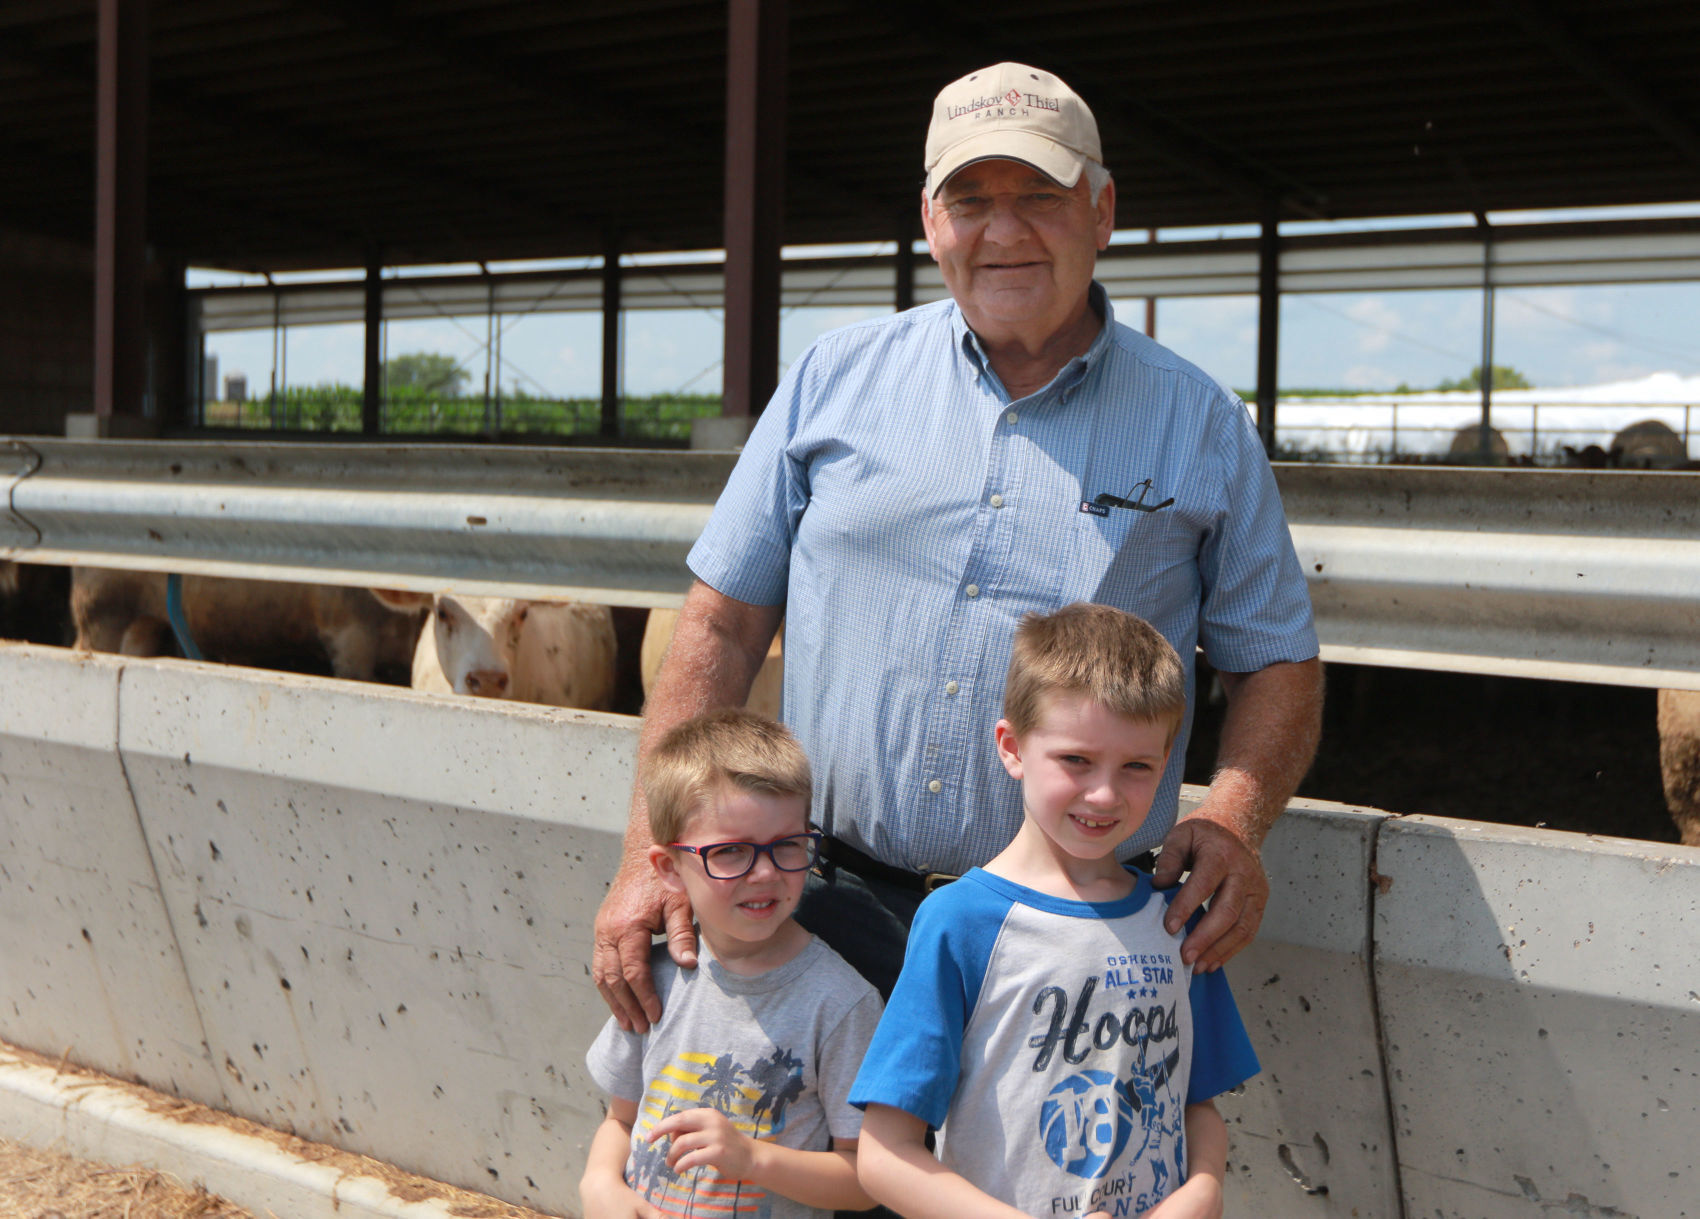 Jack Smith stands with his grandsons Ben Smith (left), 5, and Jack Smith, 7, on their family farm in Bankston, Iowa. PHOTO CREDIT: Katie Goodale